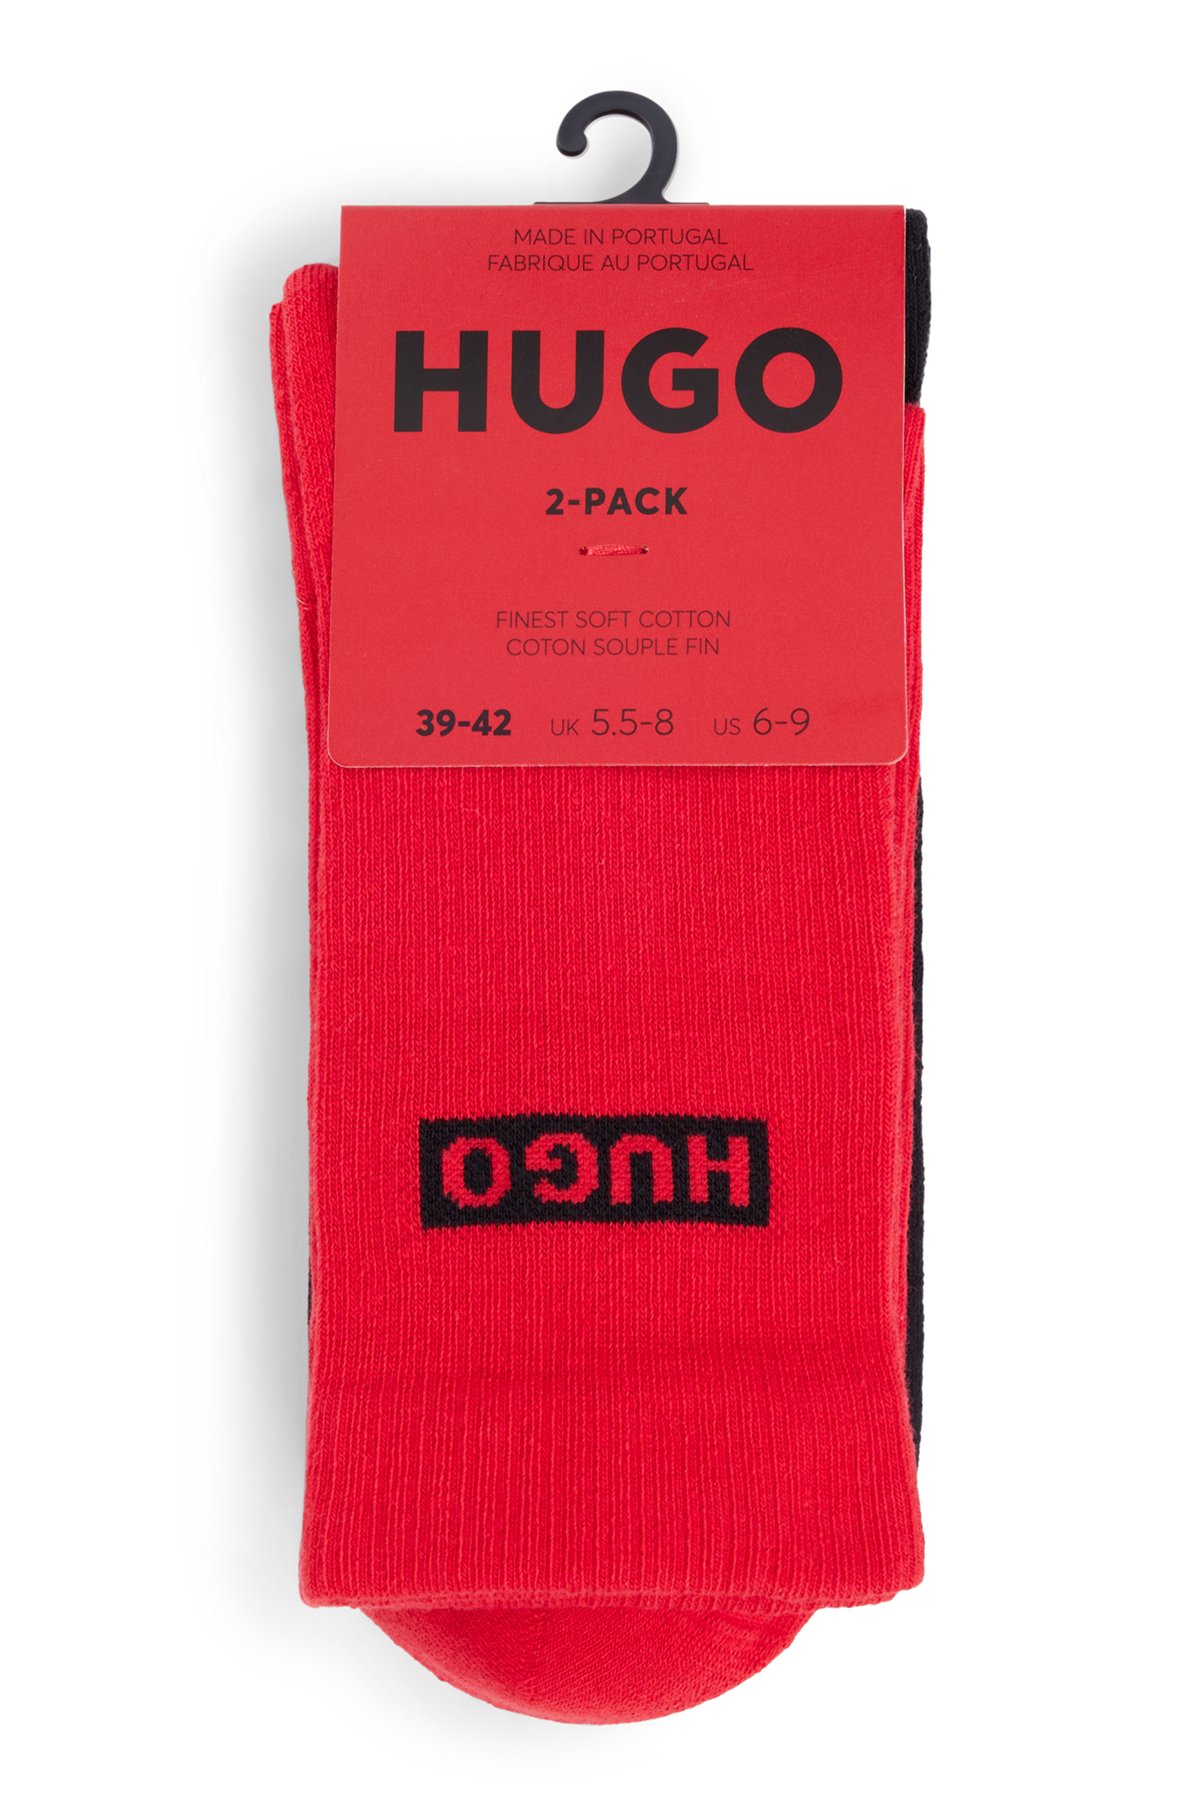 HUGO - Two-pack of cotton-blend short socks with logos